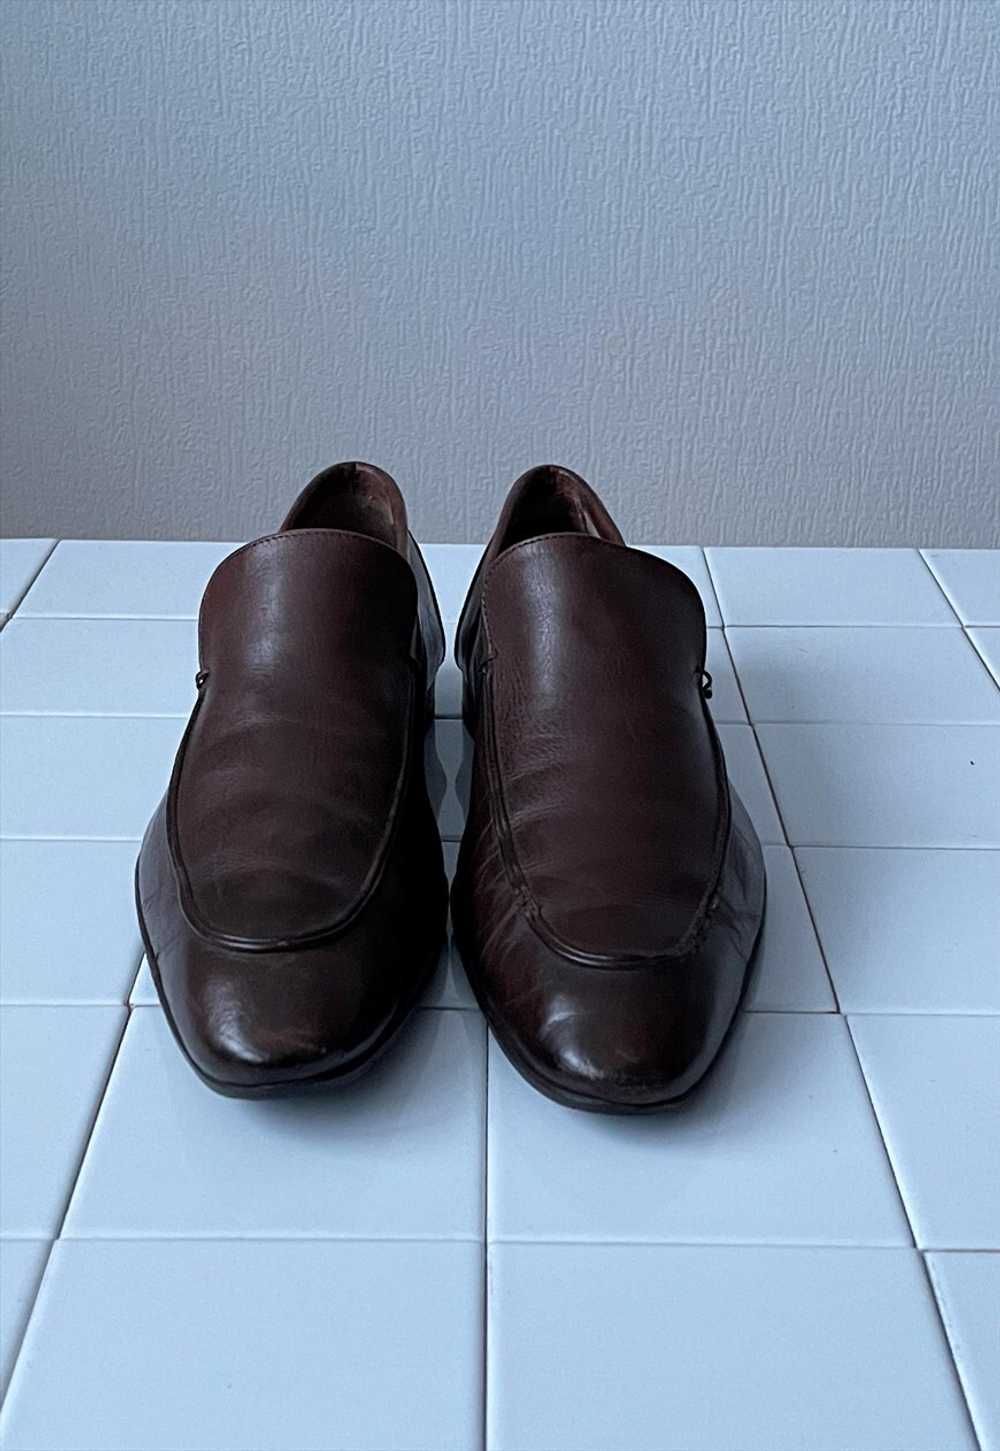 Vintage GUCCI Shoes Loafers Derby 90s Tom Ford Era - image 3